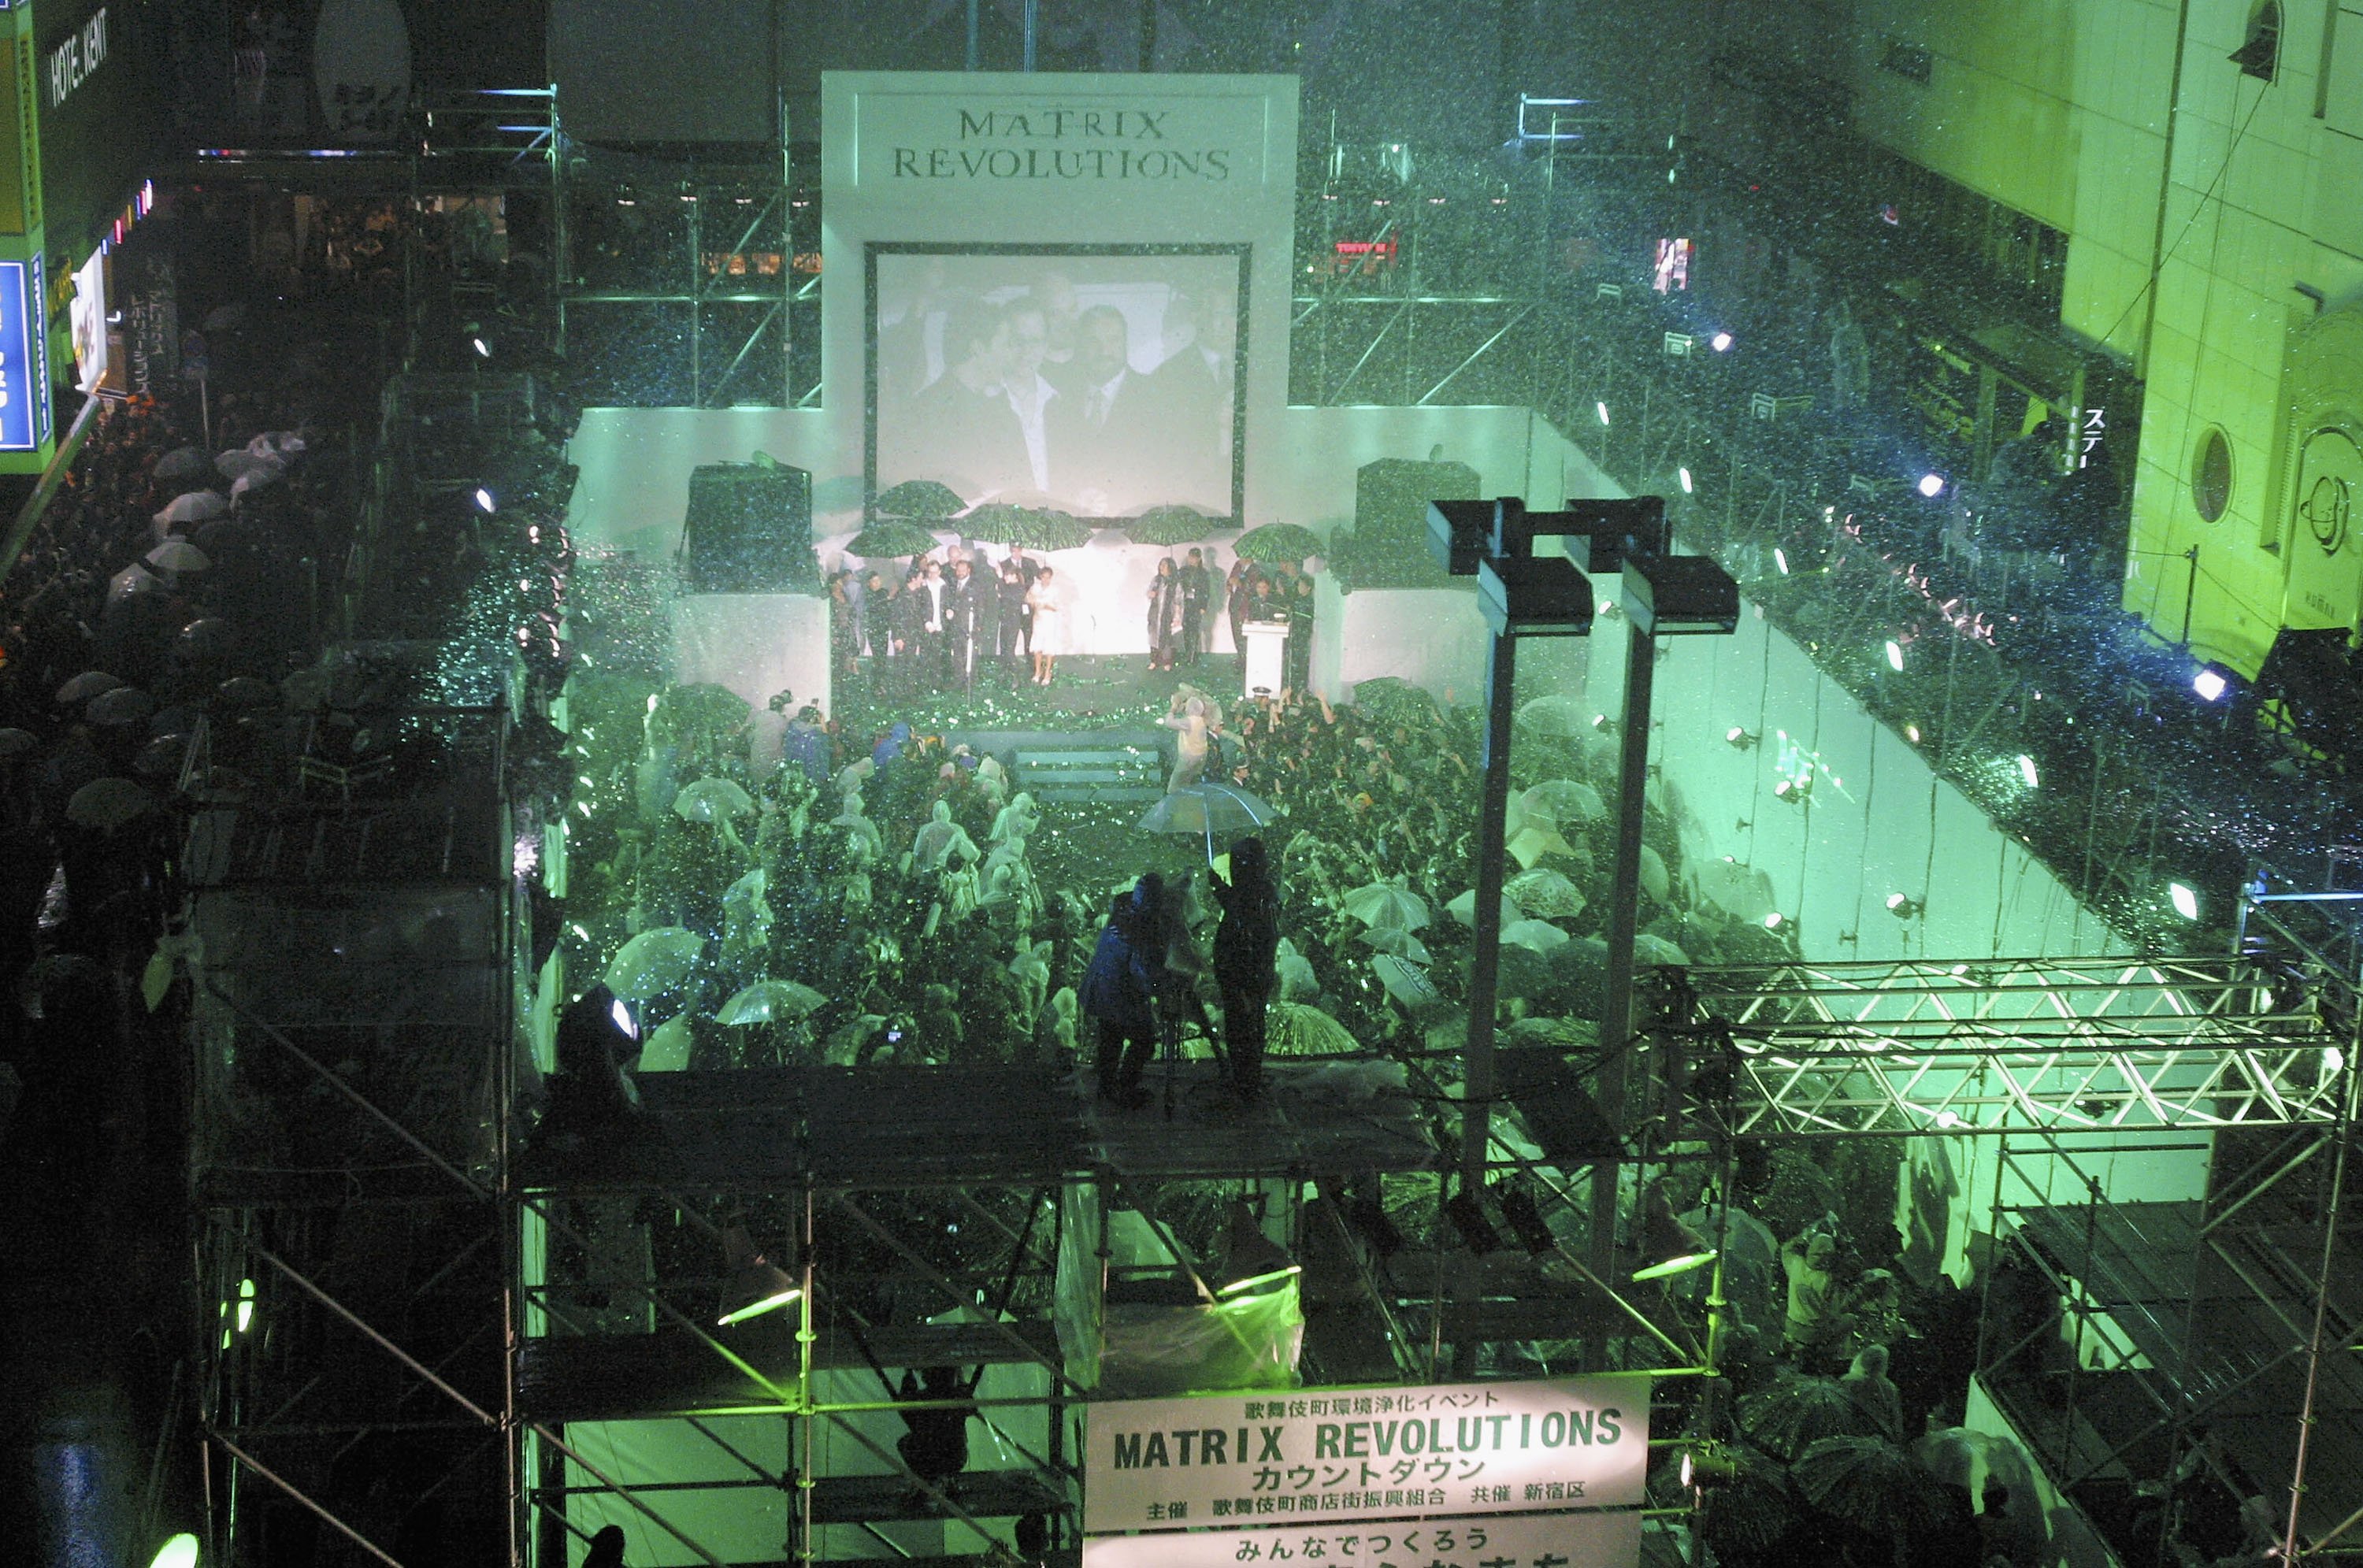 The Matrix trilogy crew, including Keanu Reeves, actress Jada Pinkett Smith, producer Joel Silver, designer Geofrey Darrow and others attend the count down to the opening of 'The Matrix Revolutions.'